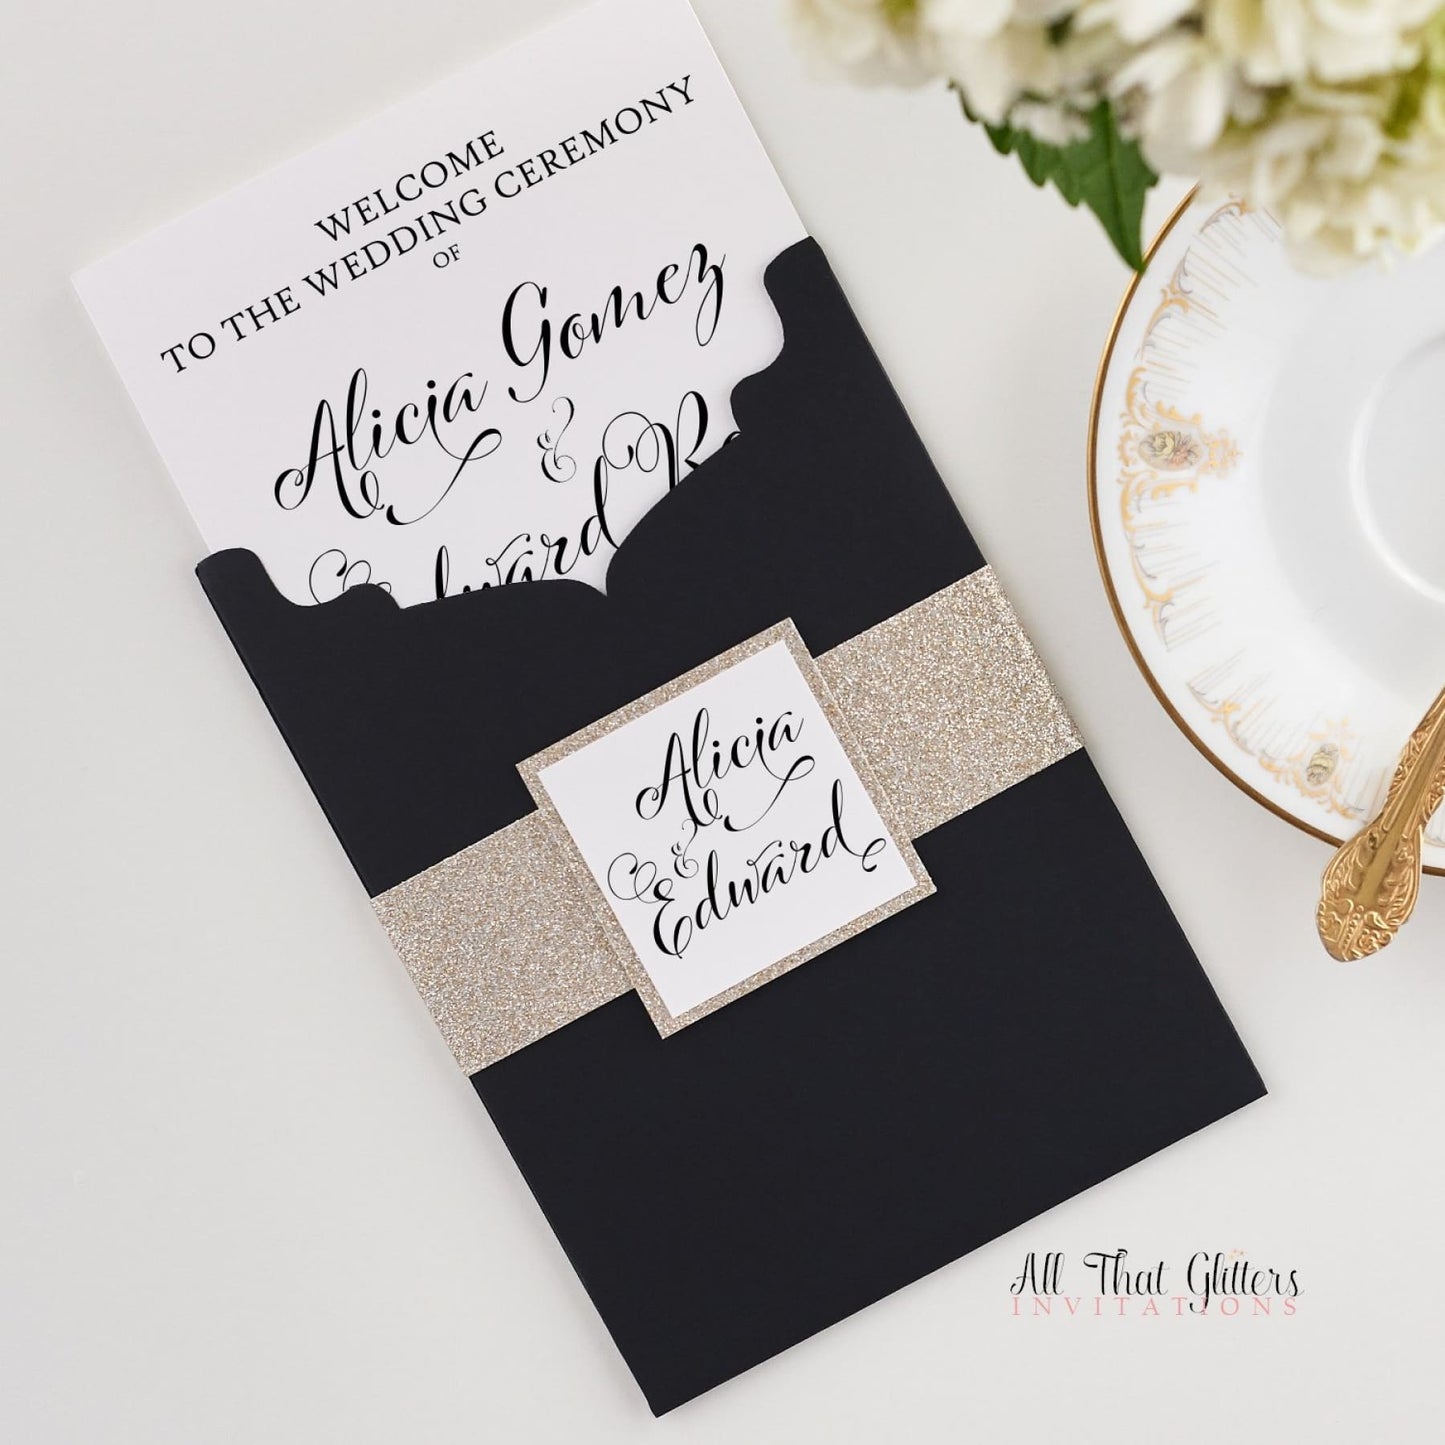 Ceremony Program, Bi-Fold Booklet with Pocket - All That Glitters Invitations